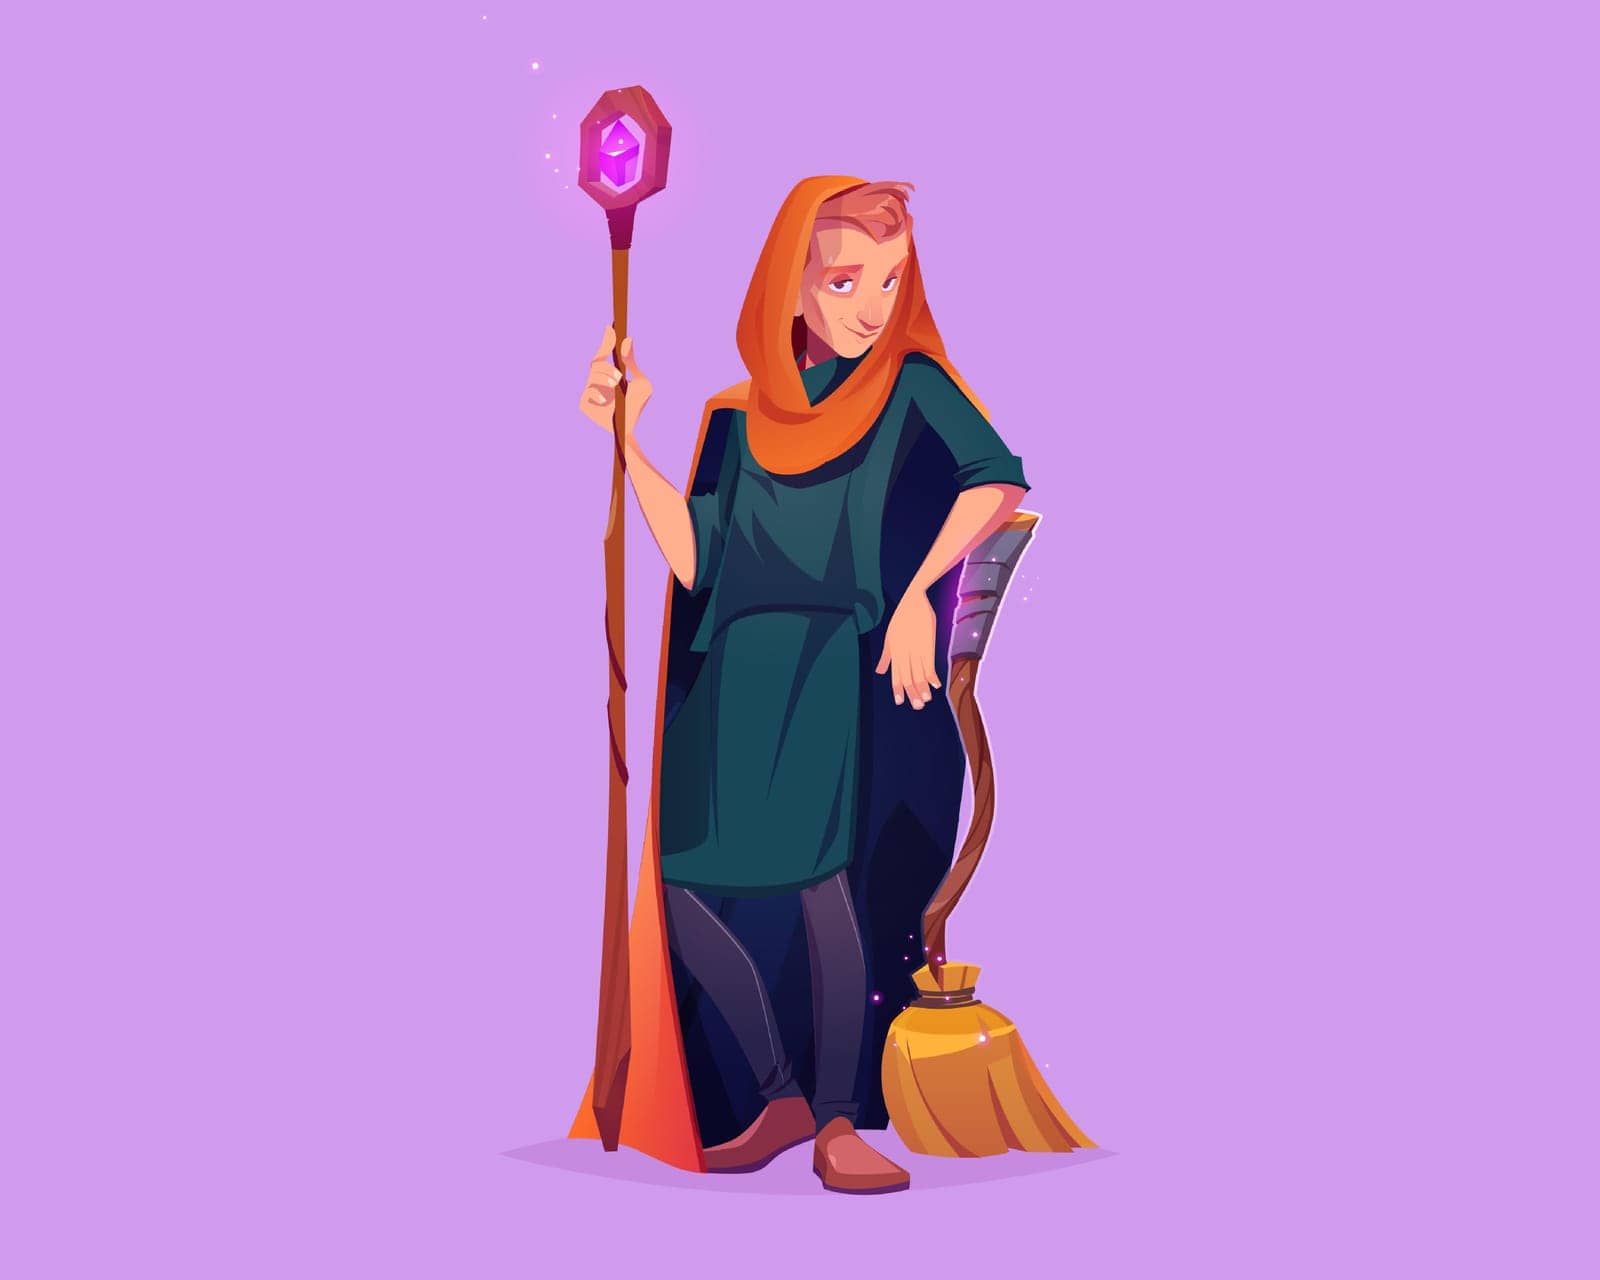 Man wizard with magic staff and broom by upklyak